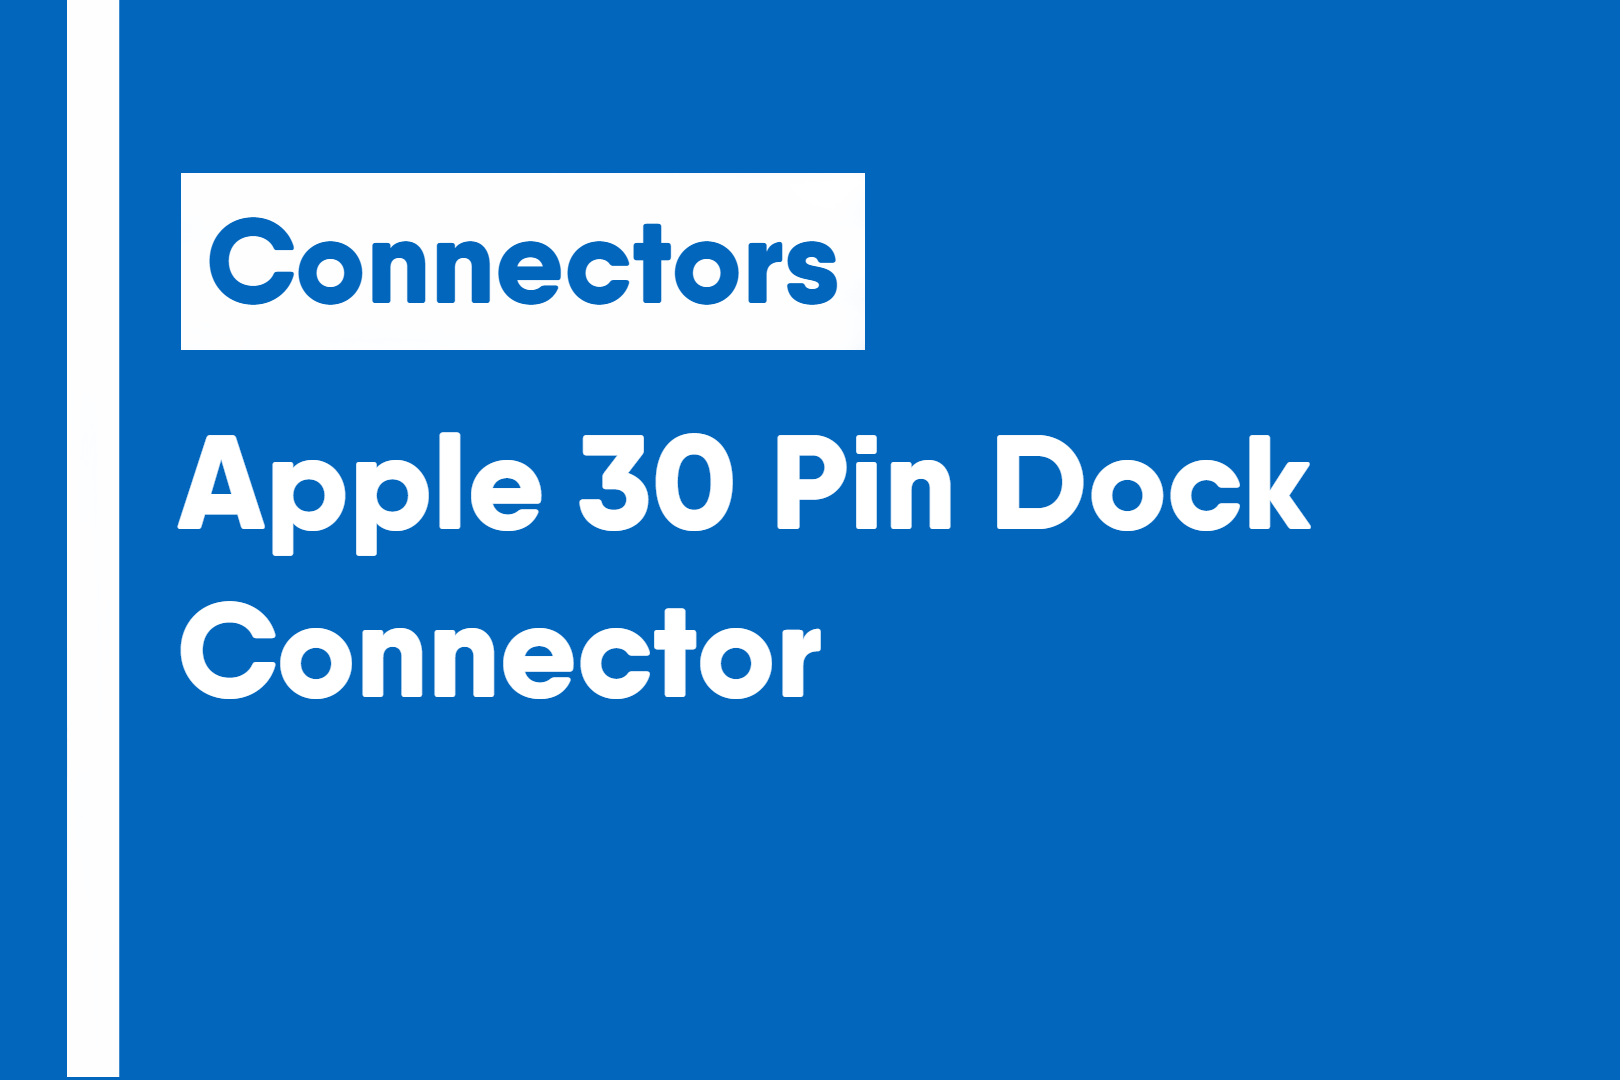 Apple 30 Pin Dock Connector